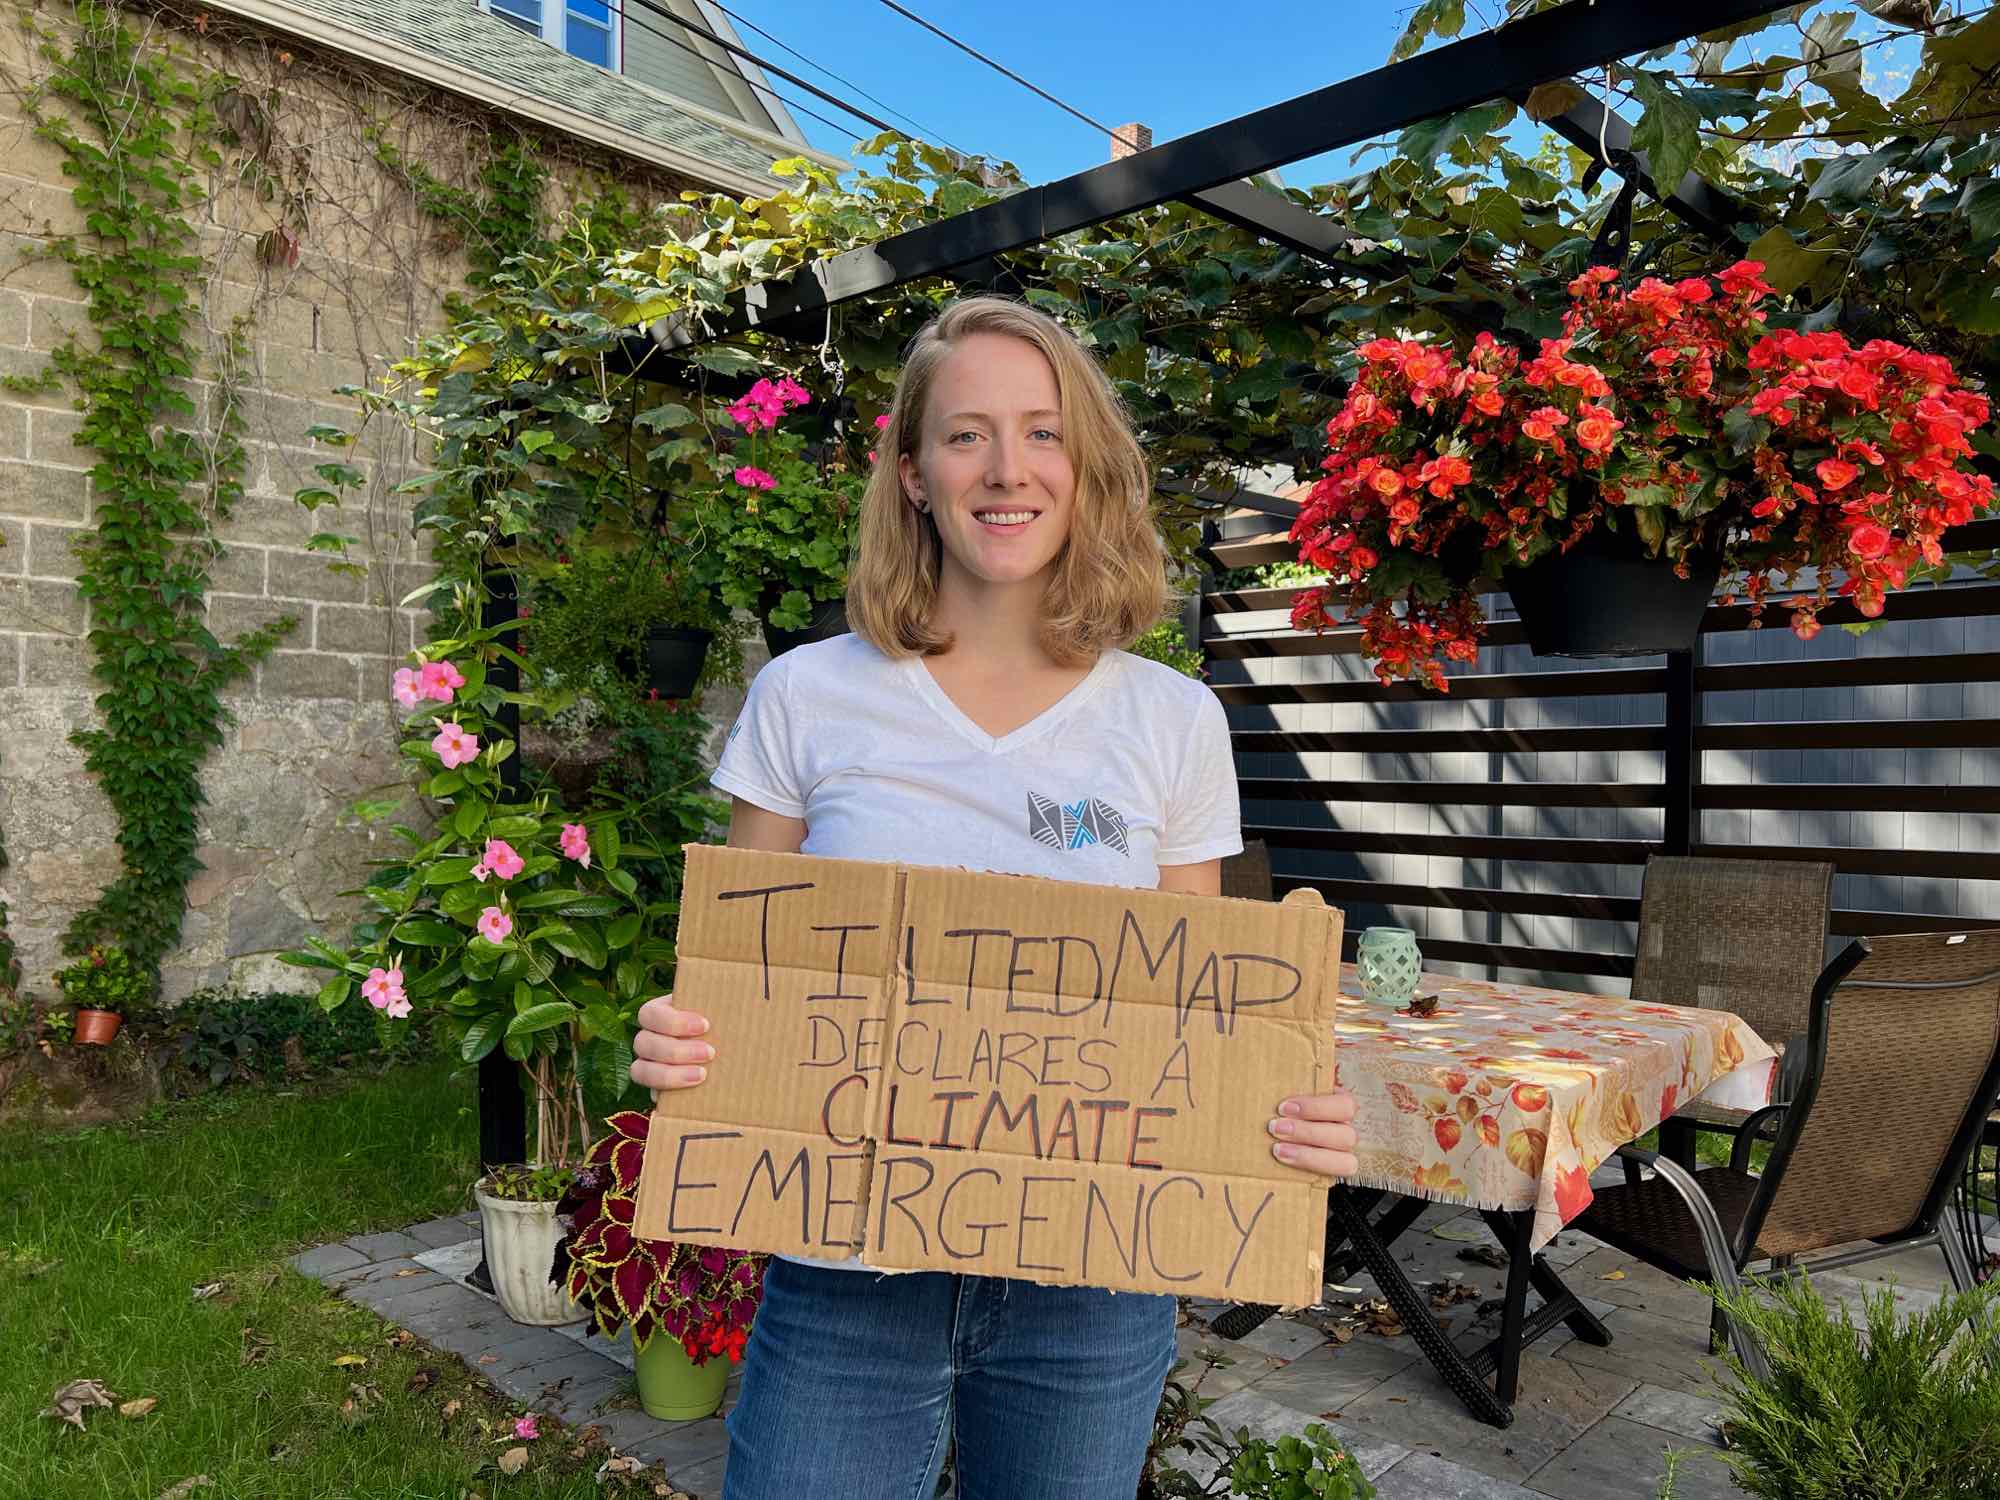 Ketti Wilhelm, the author of this sustainable travel blog, holds a sign that read "Tilted Map declares a climate emergency." ©KettiWilhelm2022